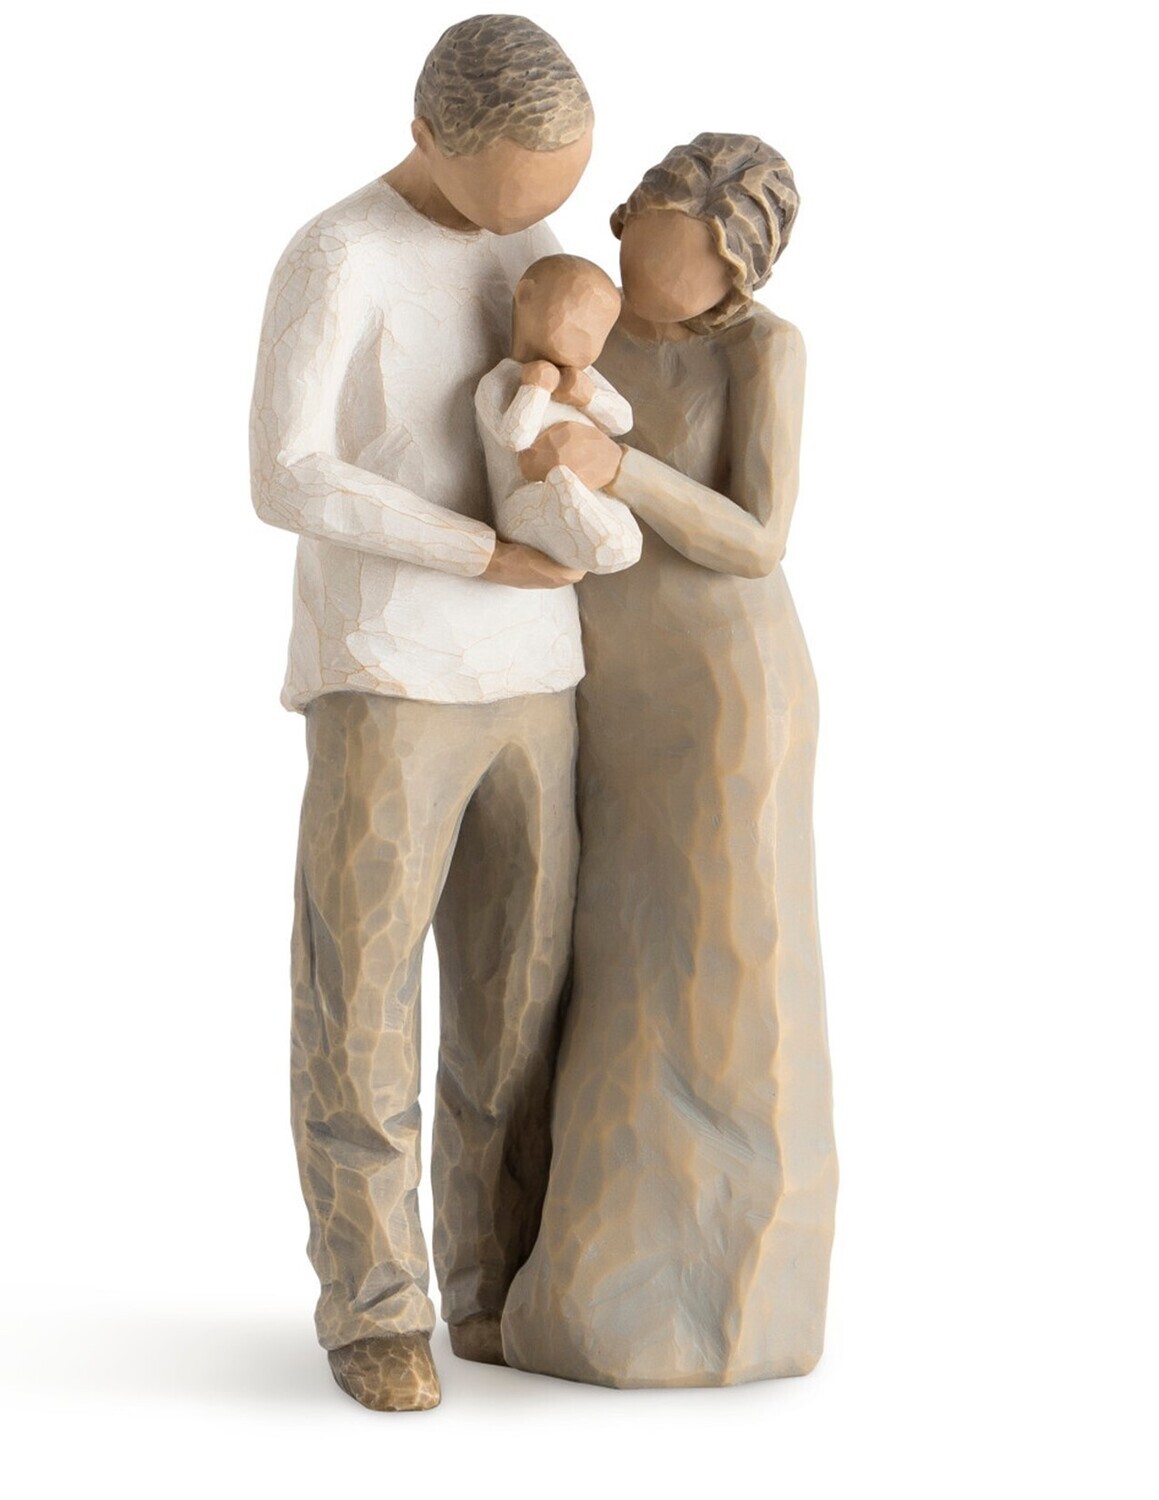 Willow Tree Darker Skin Tone "We are Three" Father, Mother & New Baby Figurine (27268)